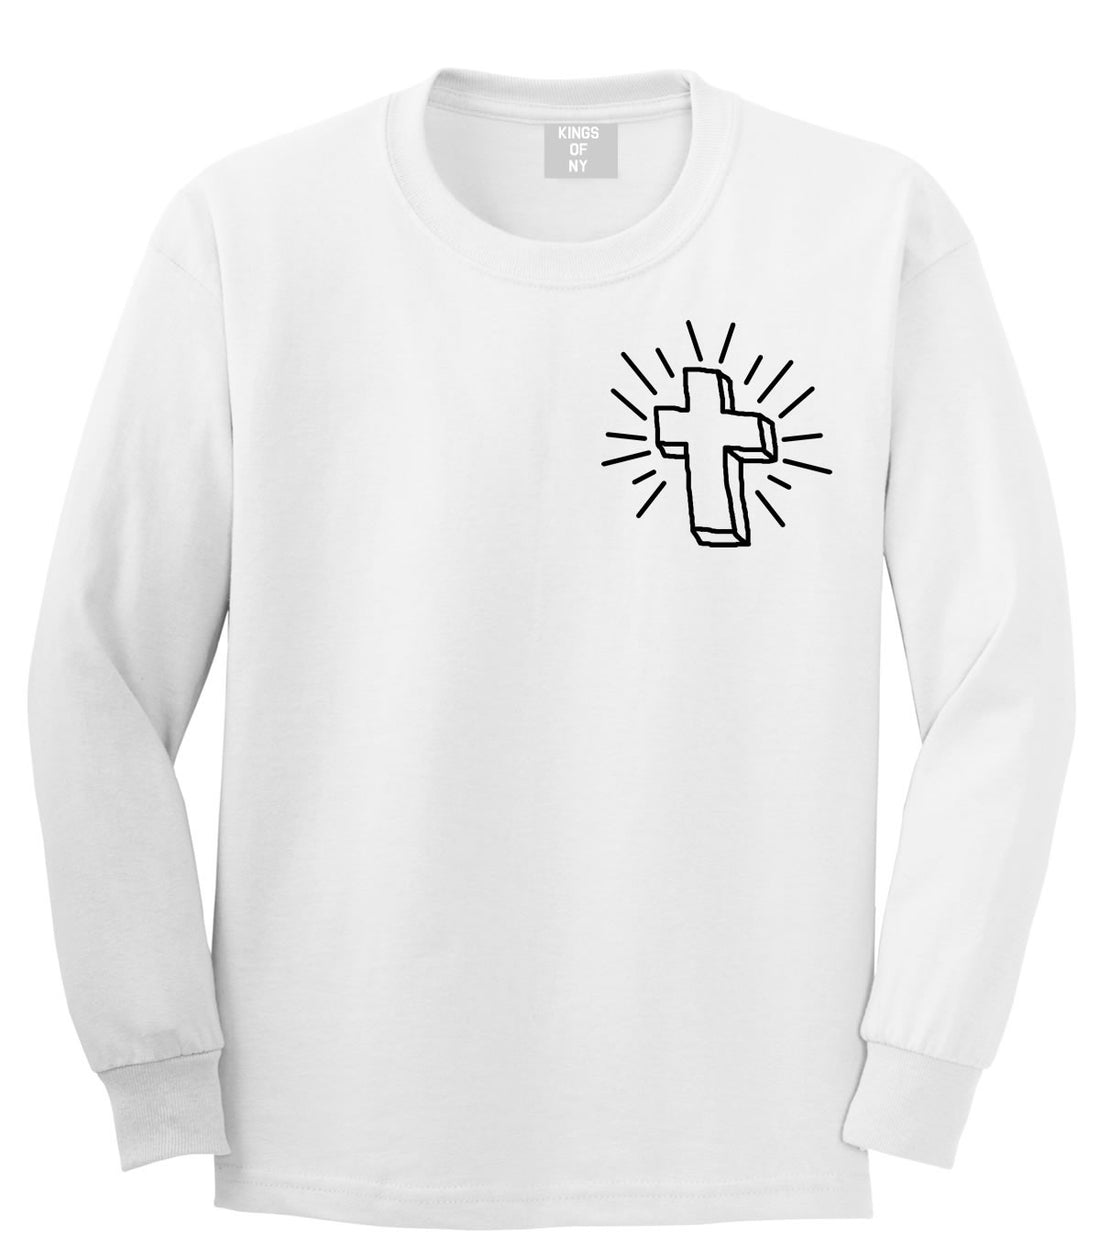 Cross of Praise Chest God Religious Long Sleeve T-Shirt in White By Kings Of NY